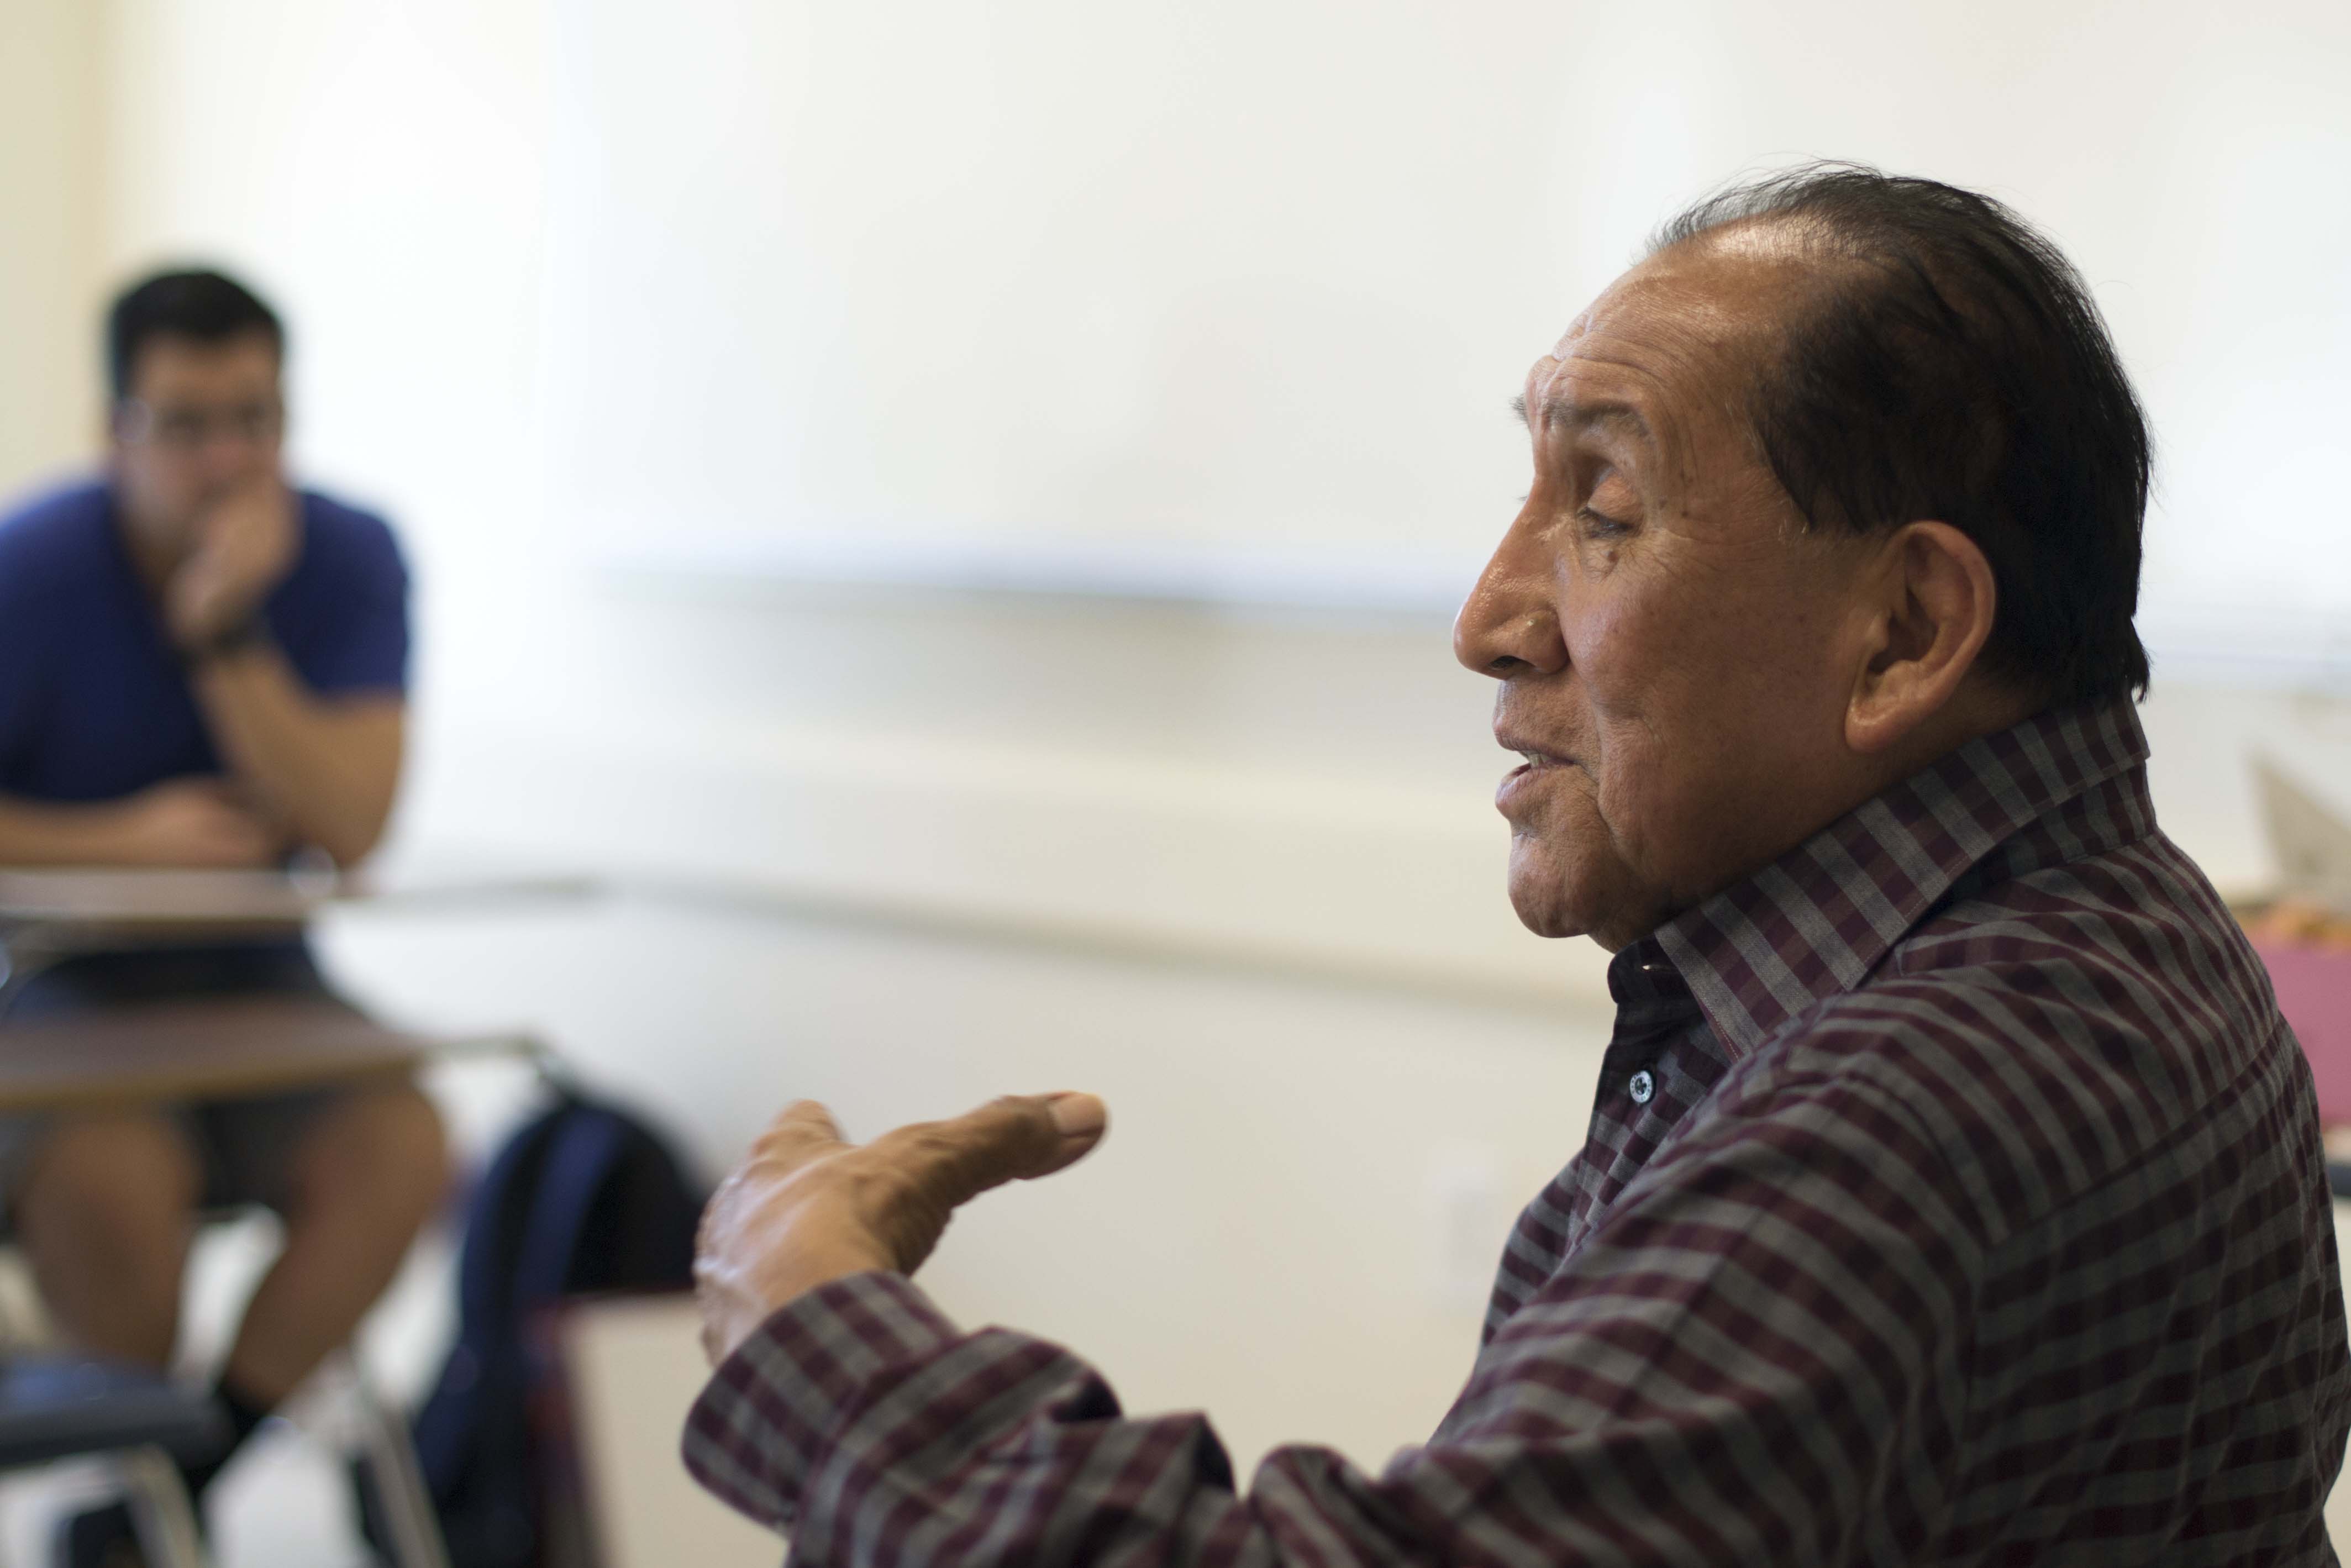 KPCC: Cal State helps save Native American Languages